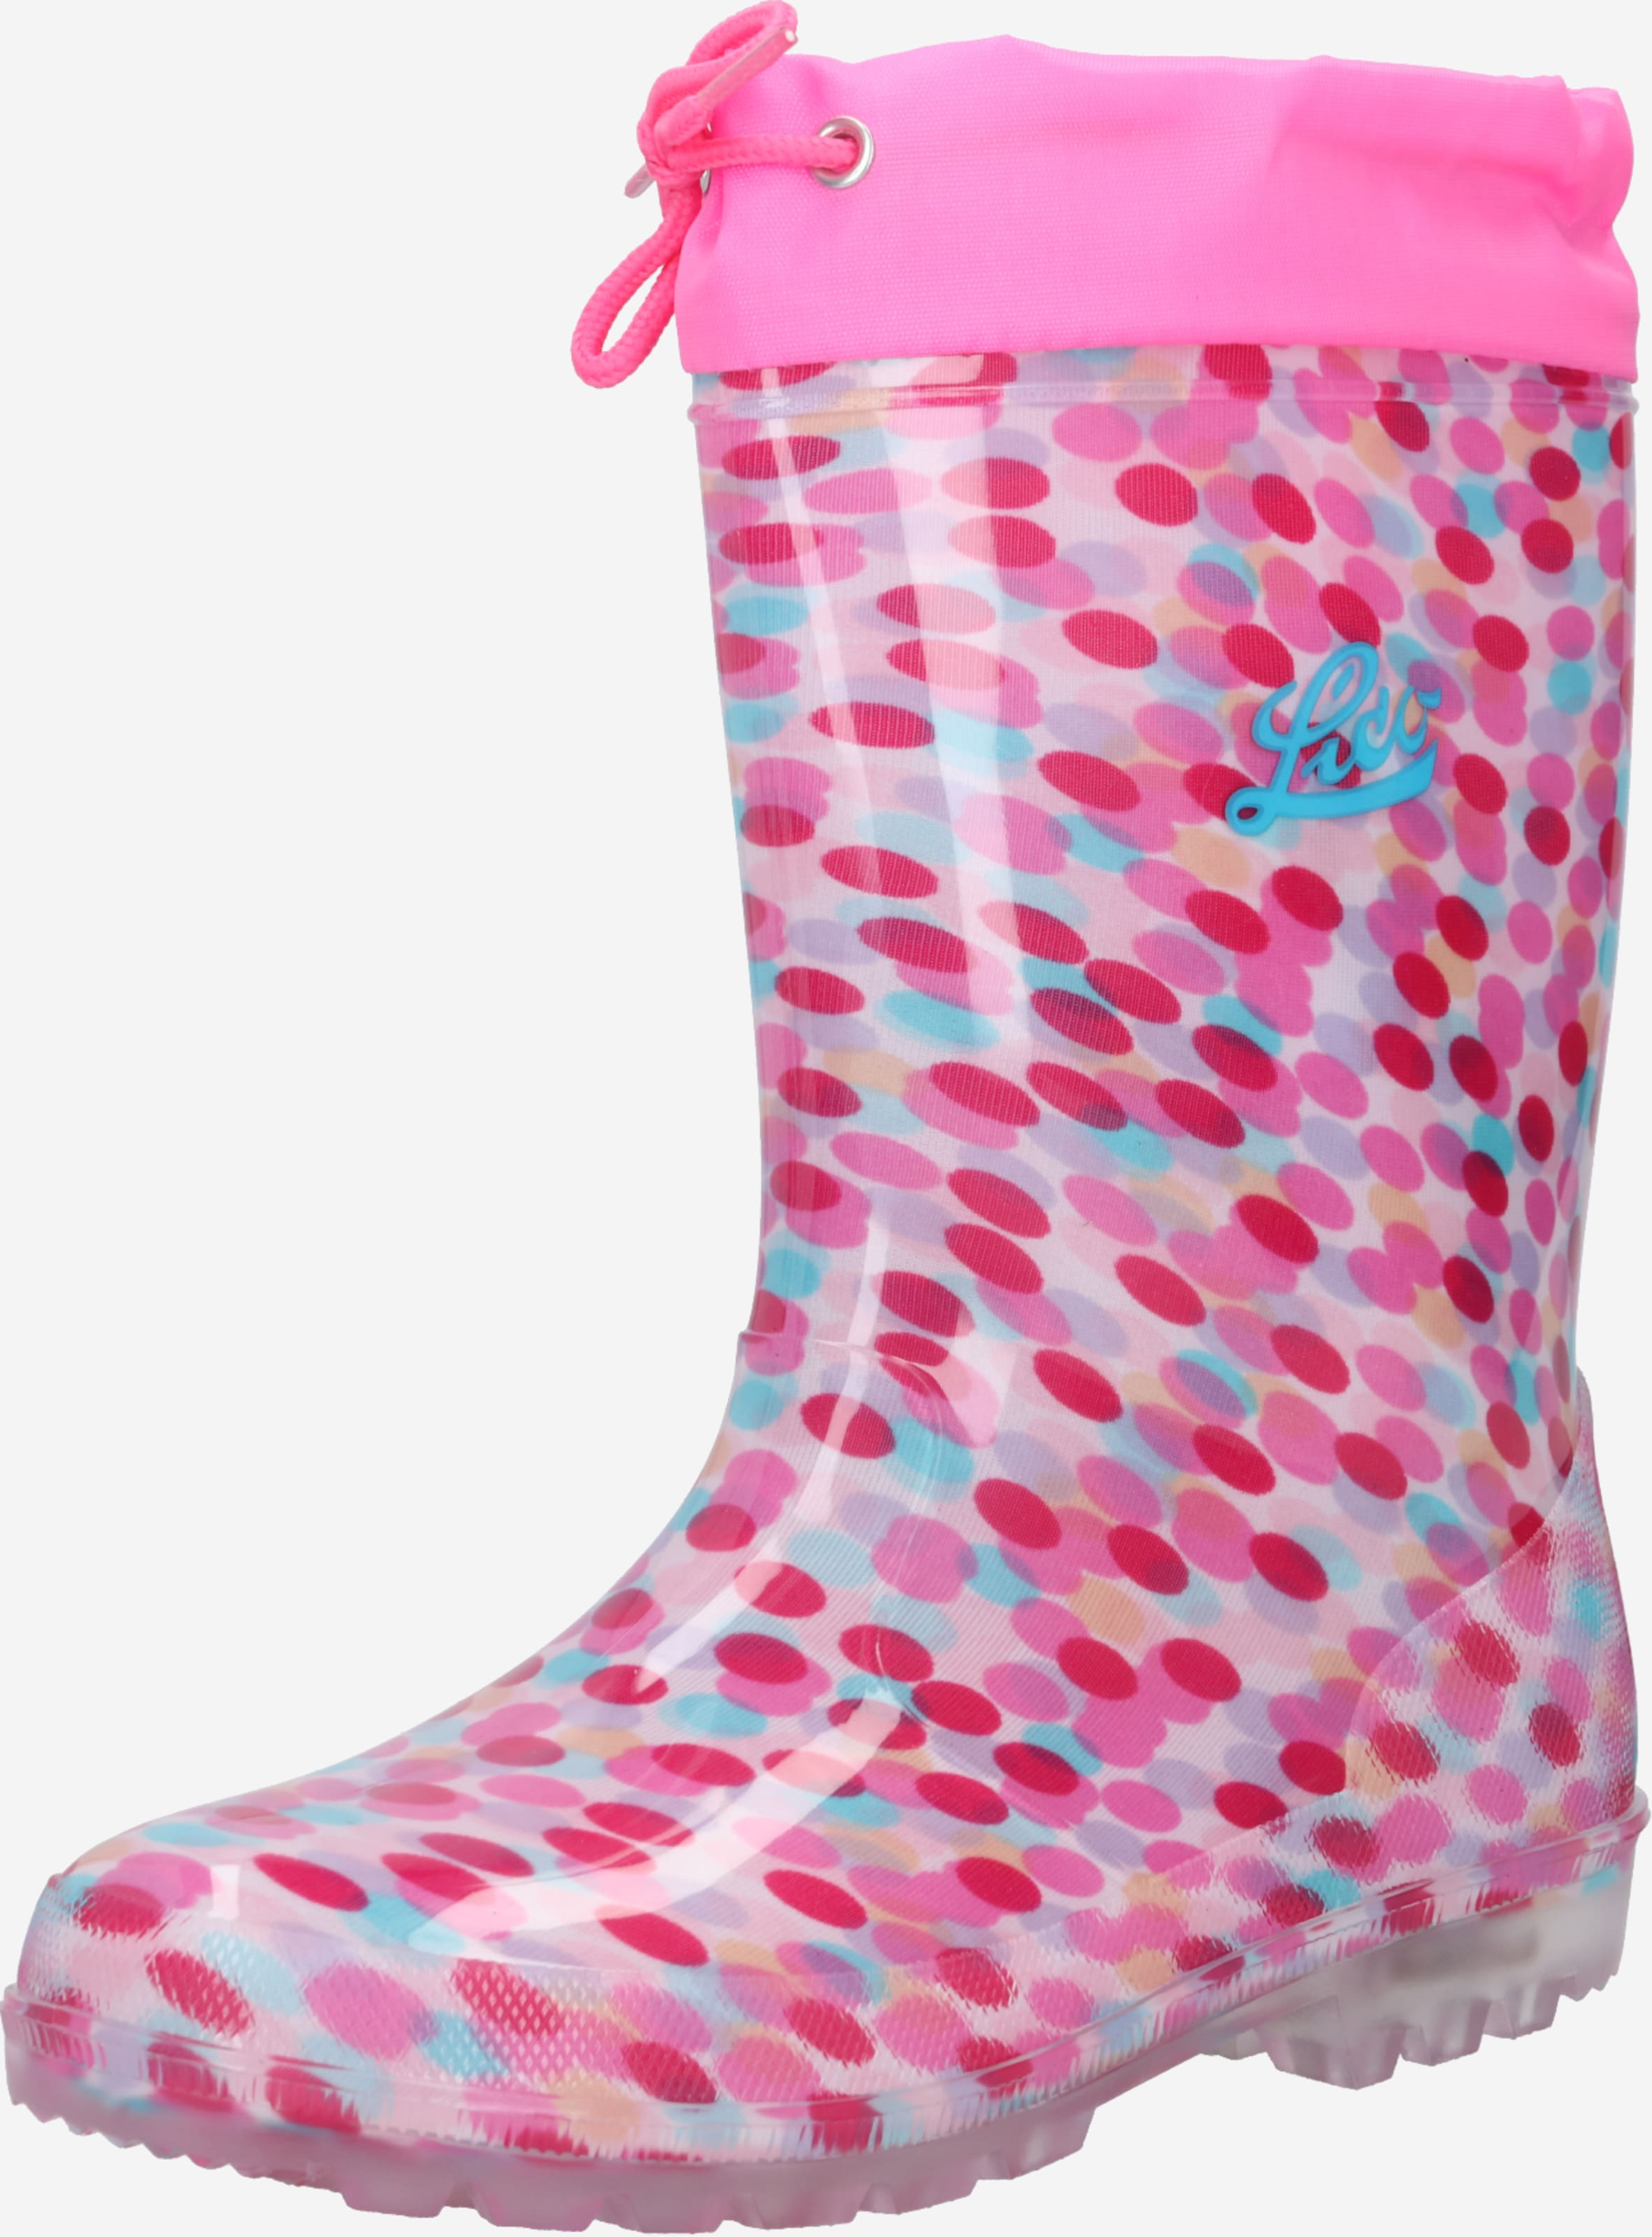 LICO Gummistiefel 'Power Blinky' in Pink, Rosa | ABOUT YOU